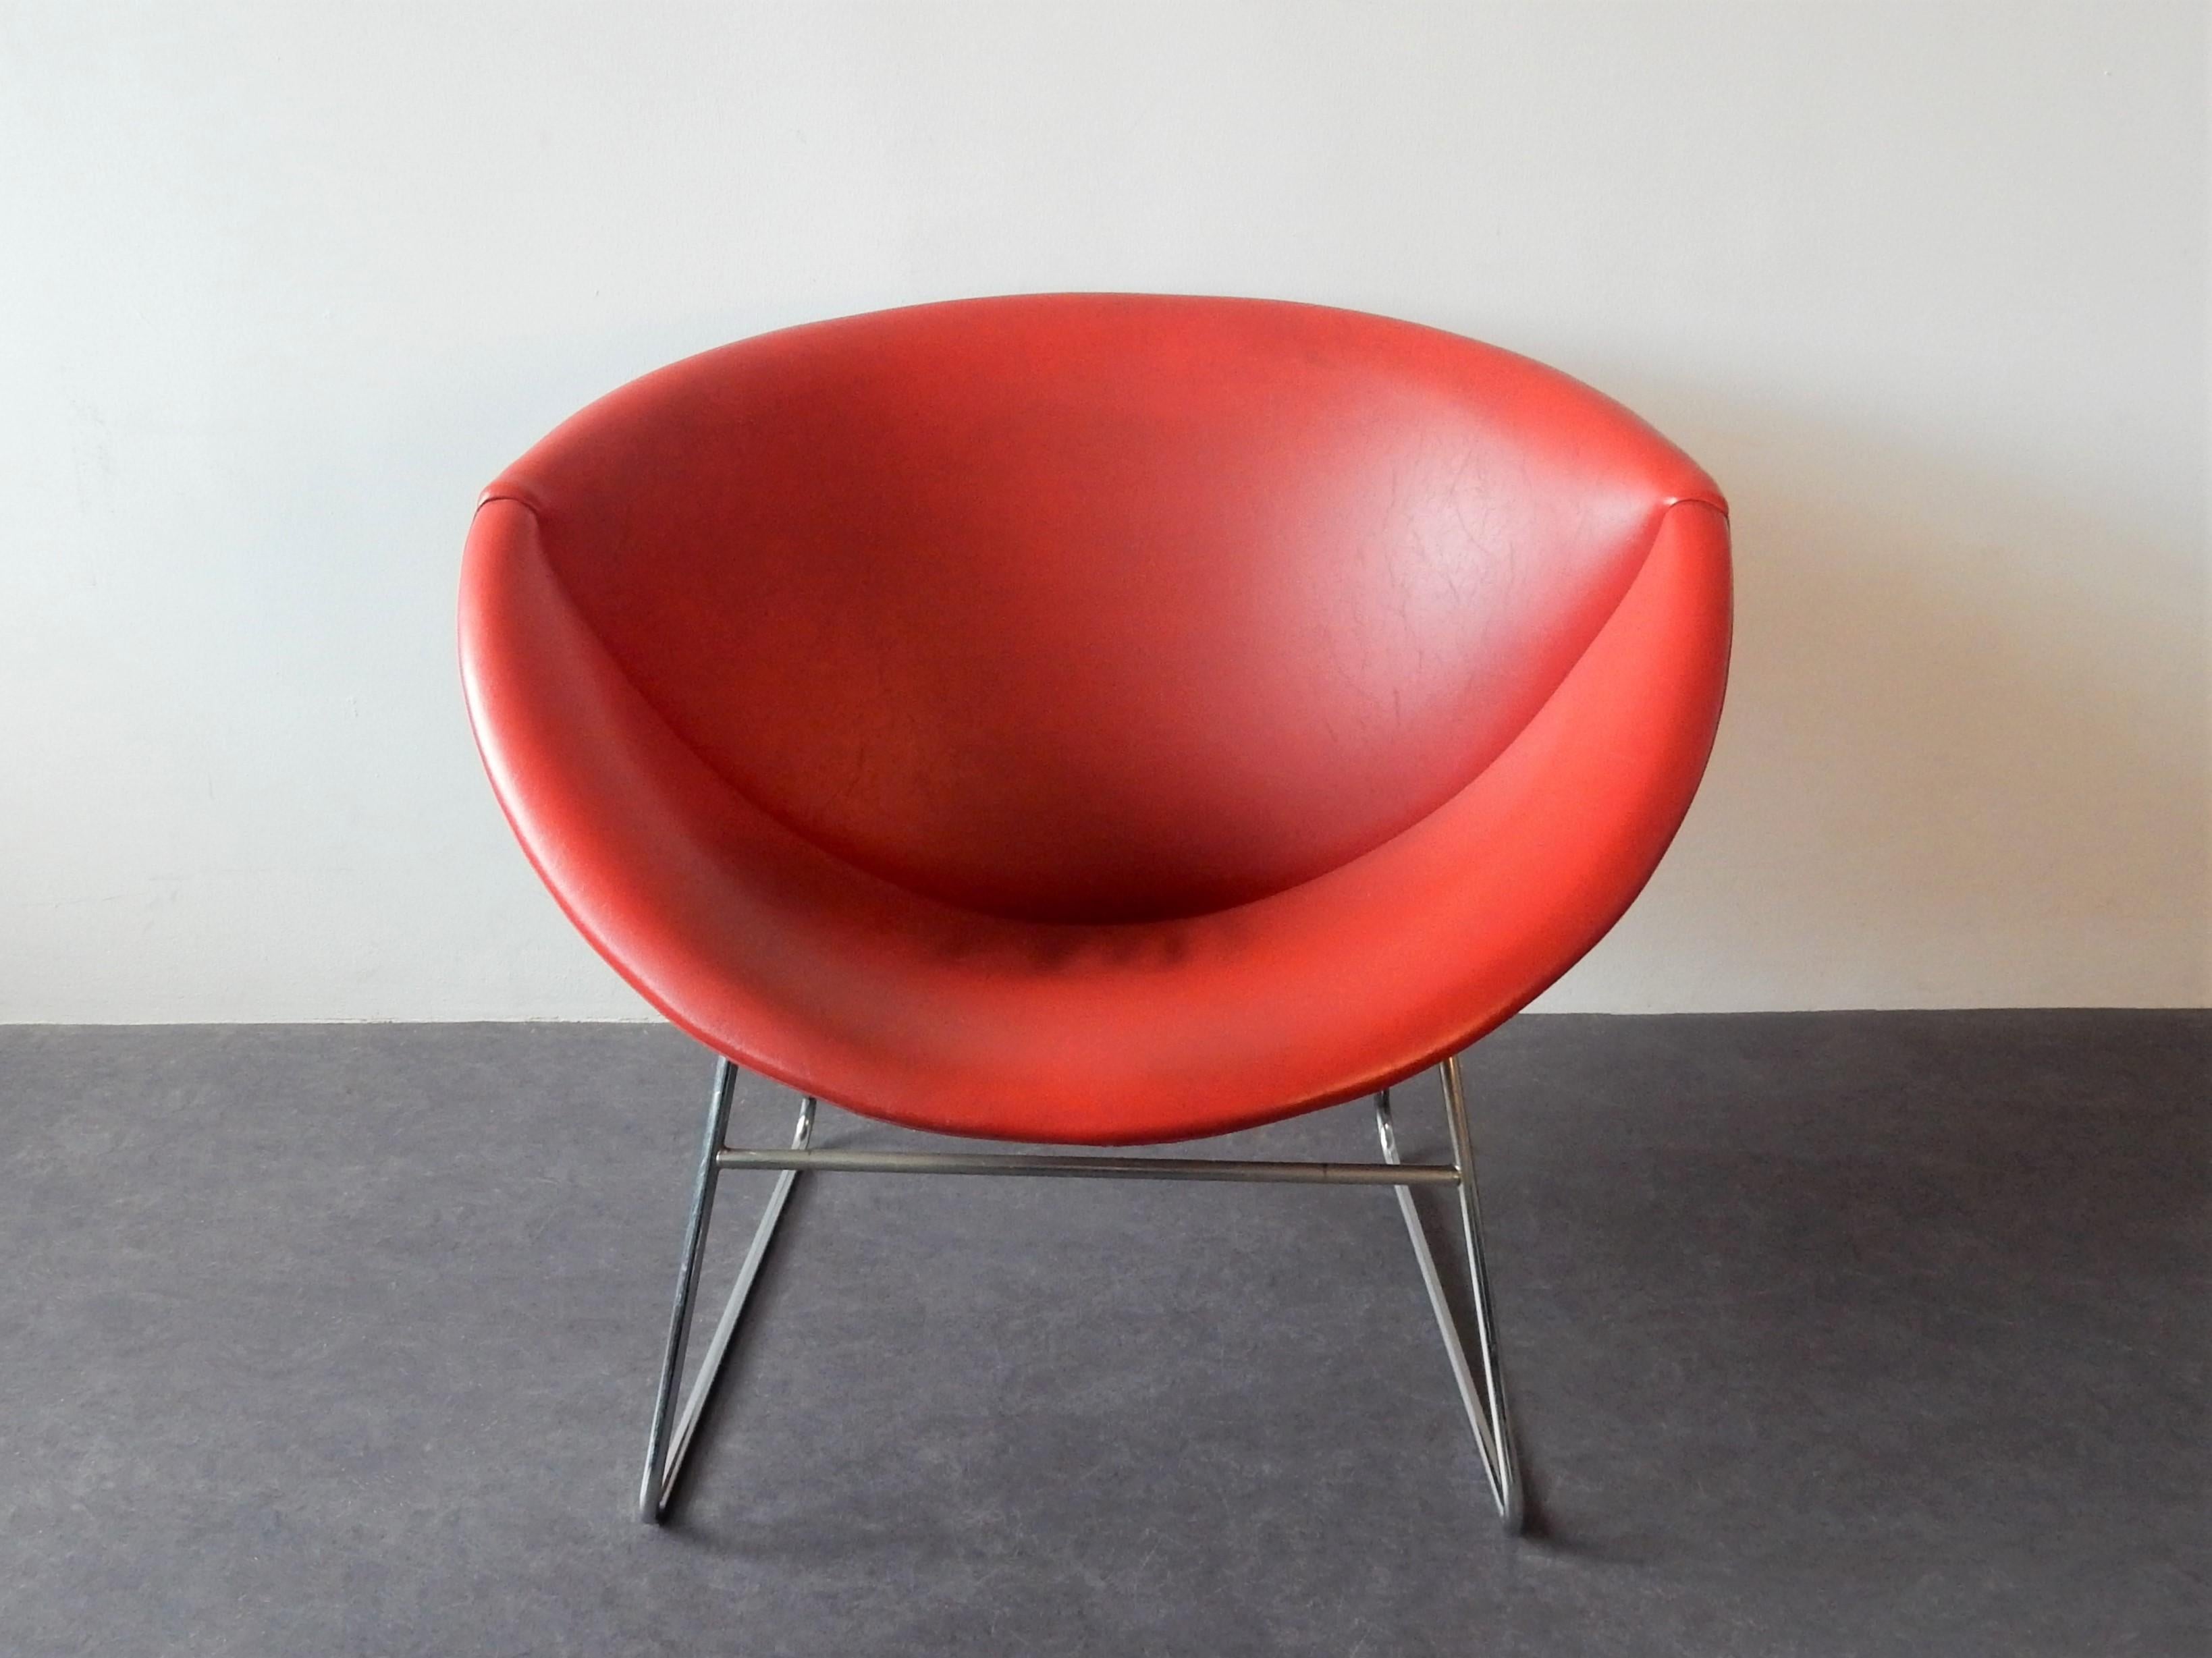 This organic shaped lounge chair, model Cocco, was designed by JH Rohe for the Dutch manufacturer Rohé in Noordwolde. It has a slim chrome frame with a nice shell-shaped seat element that is upholstered with (original) red faux leather. All in a